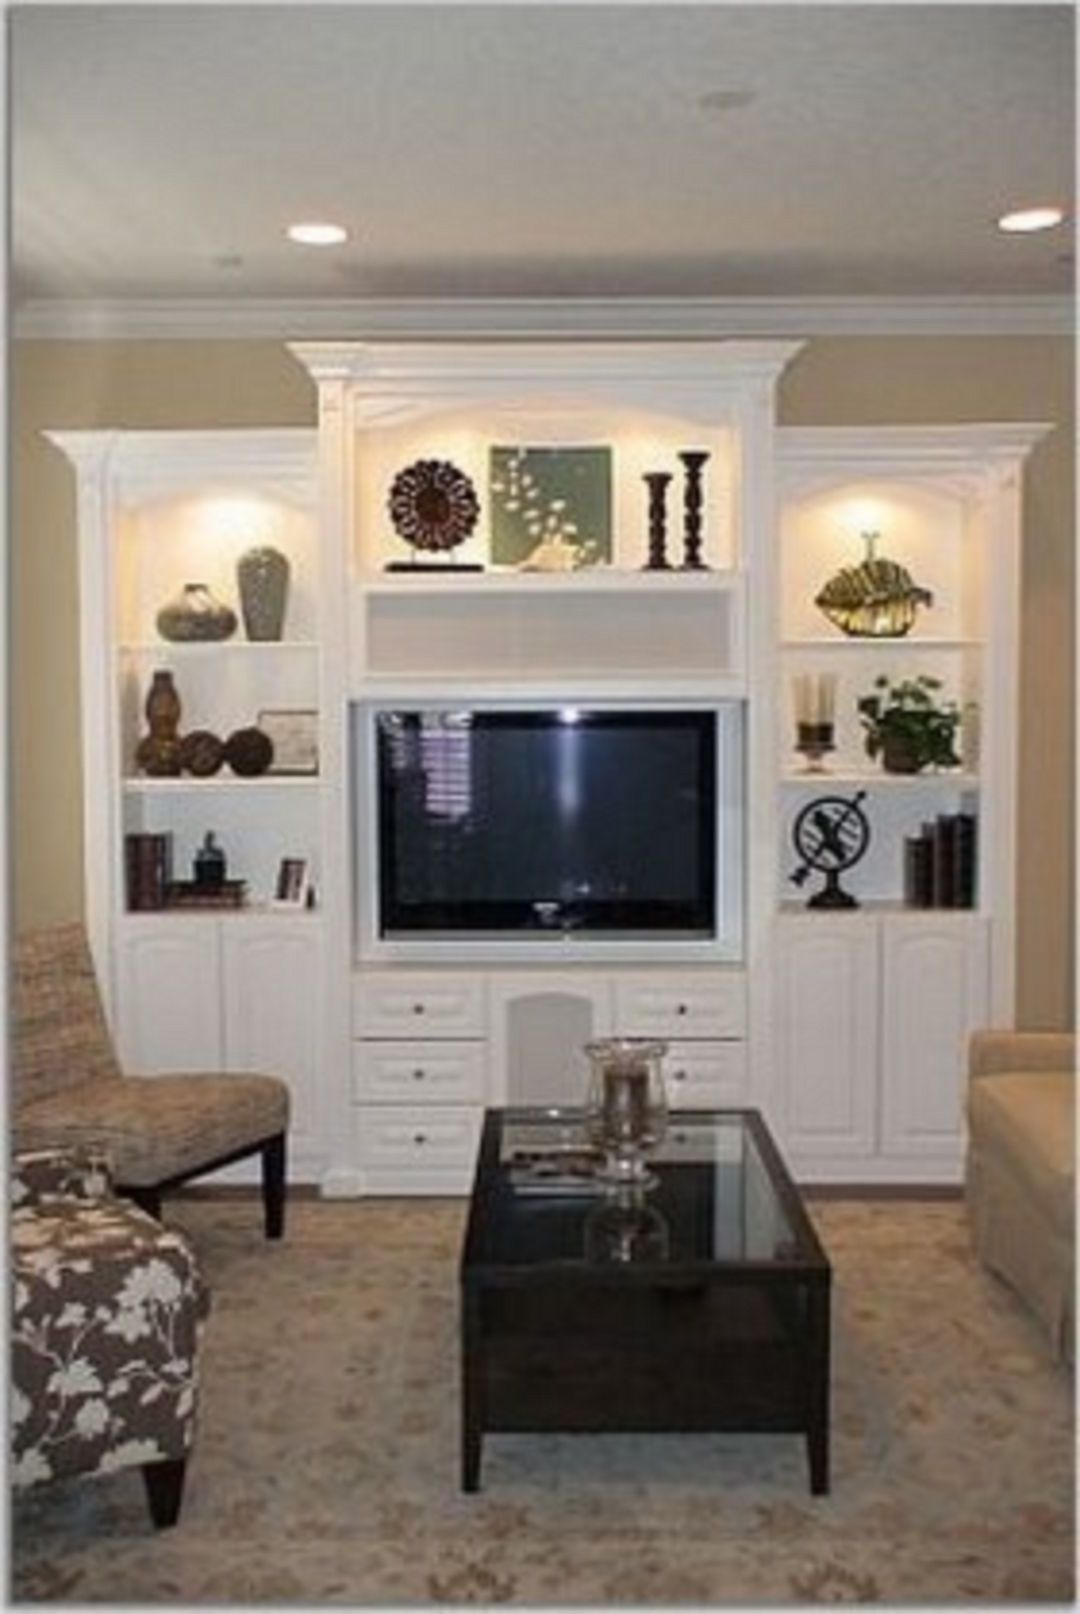 Wide Entertainment Centers Intended For Well Known Home Entertainment Center Ideas (View 14 of 15)